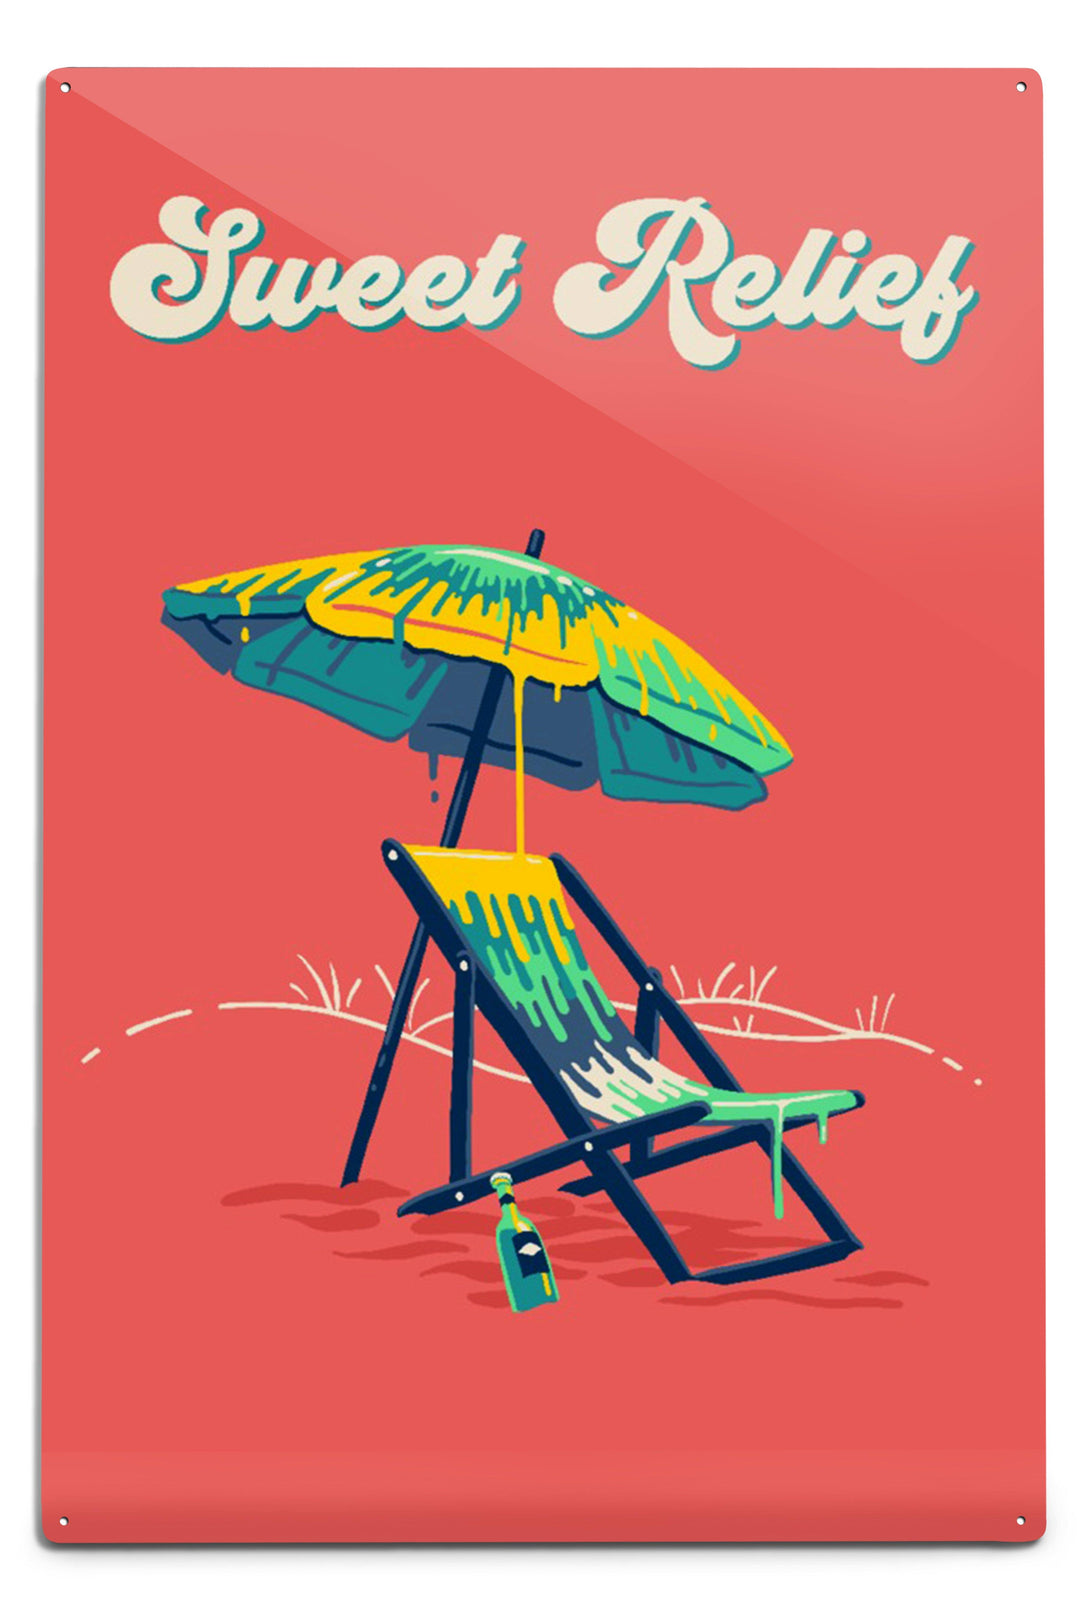 Sweet Relief Collection, Beach Chair and Umbrella, Sweet Relief, Art Prints and Metal Signs Art Lantern Press 8 x 12 Art Print 